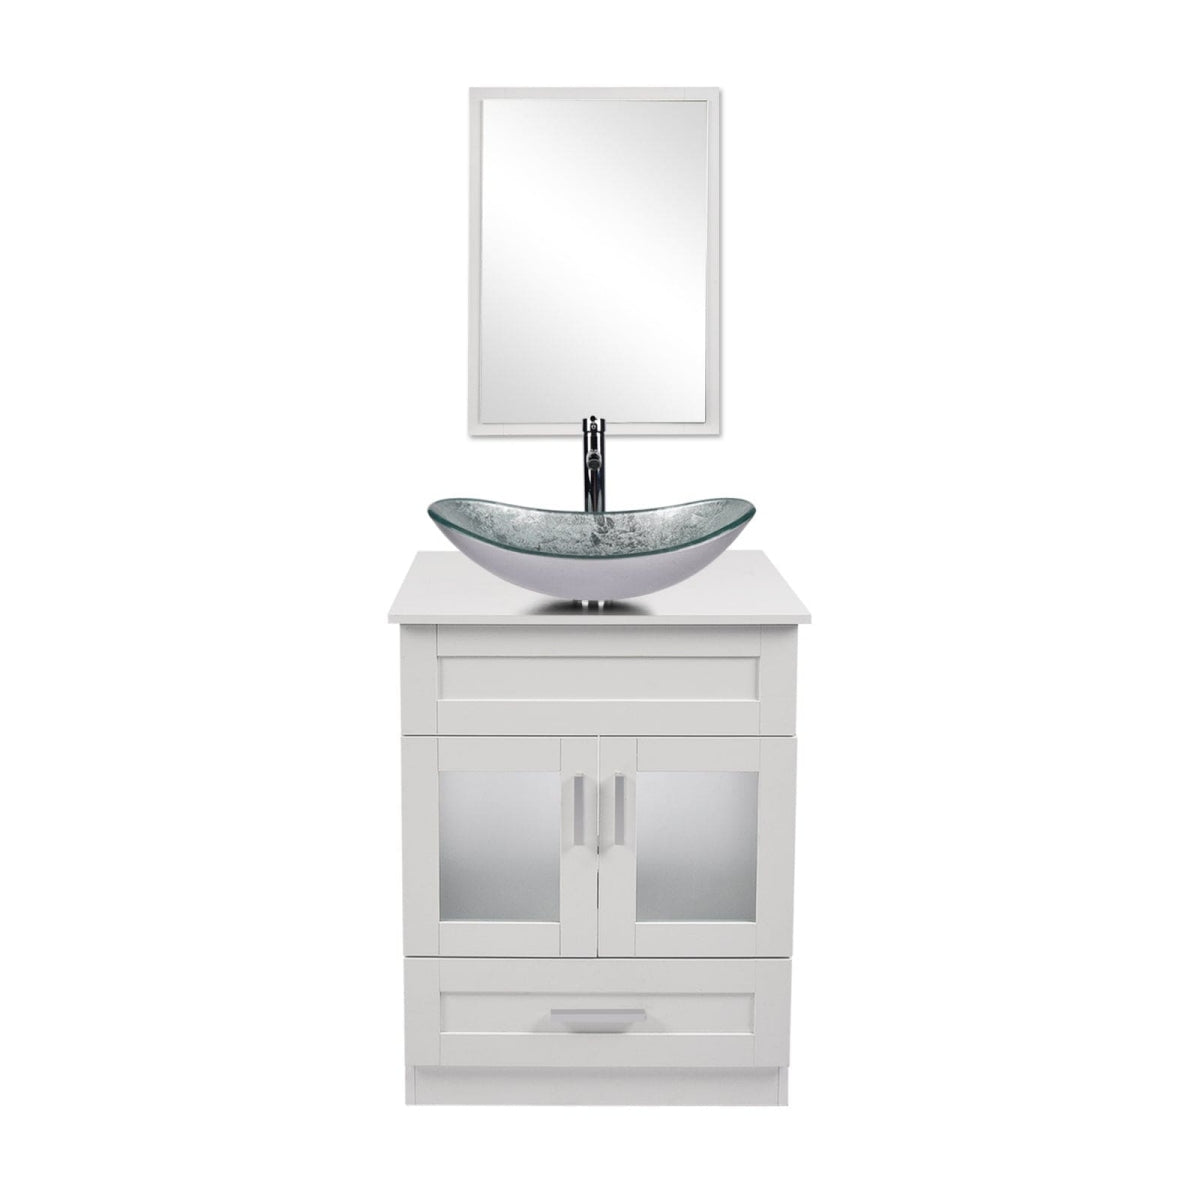 Elecwish White Bathroom Vanity with Silver Boat Sink Set BA1001-WH